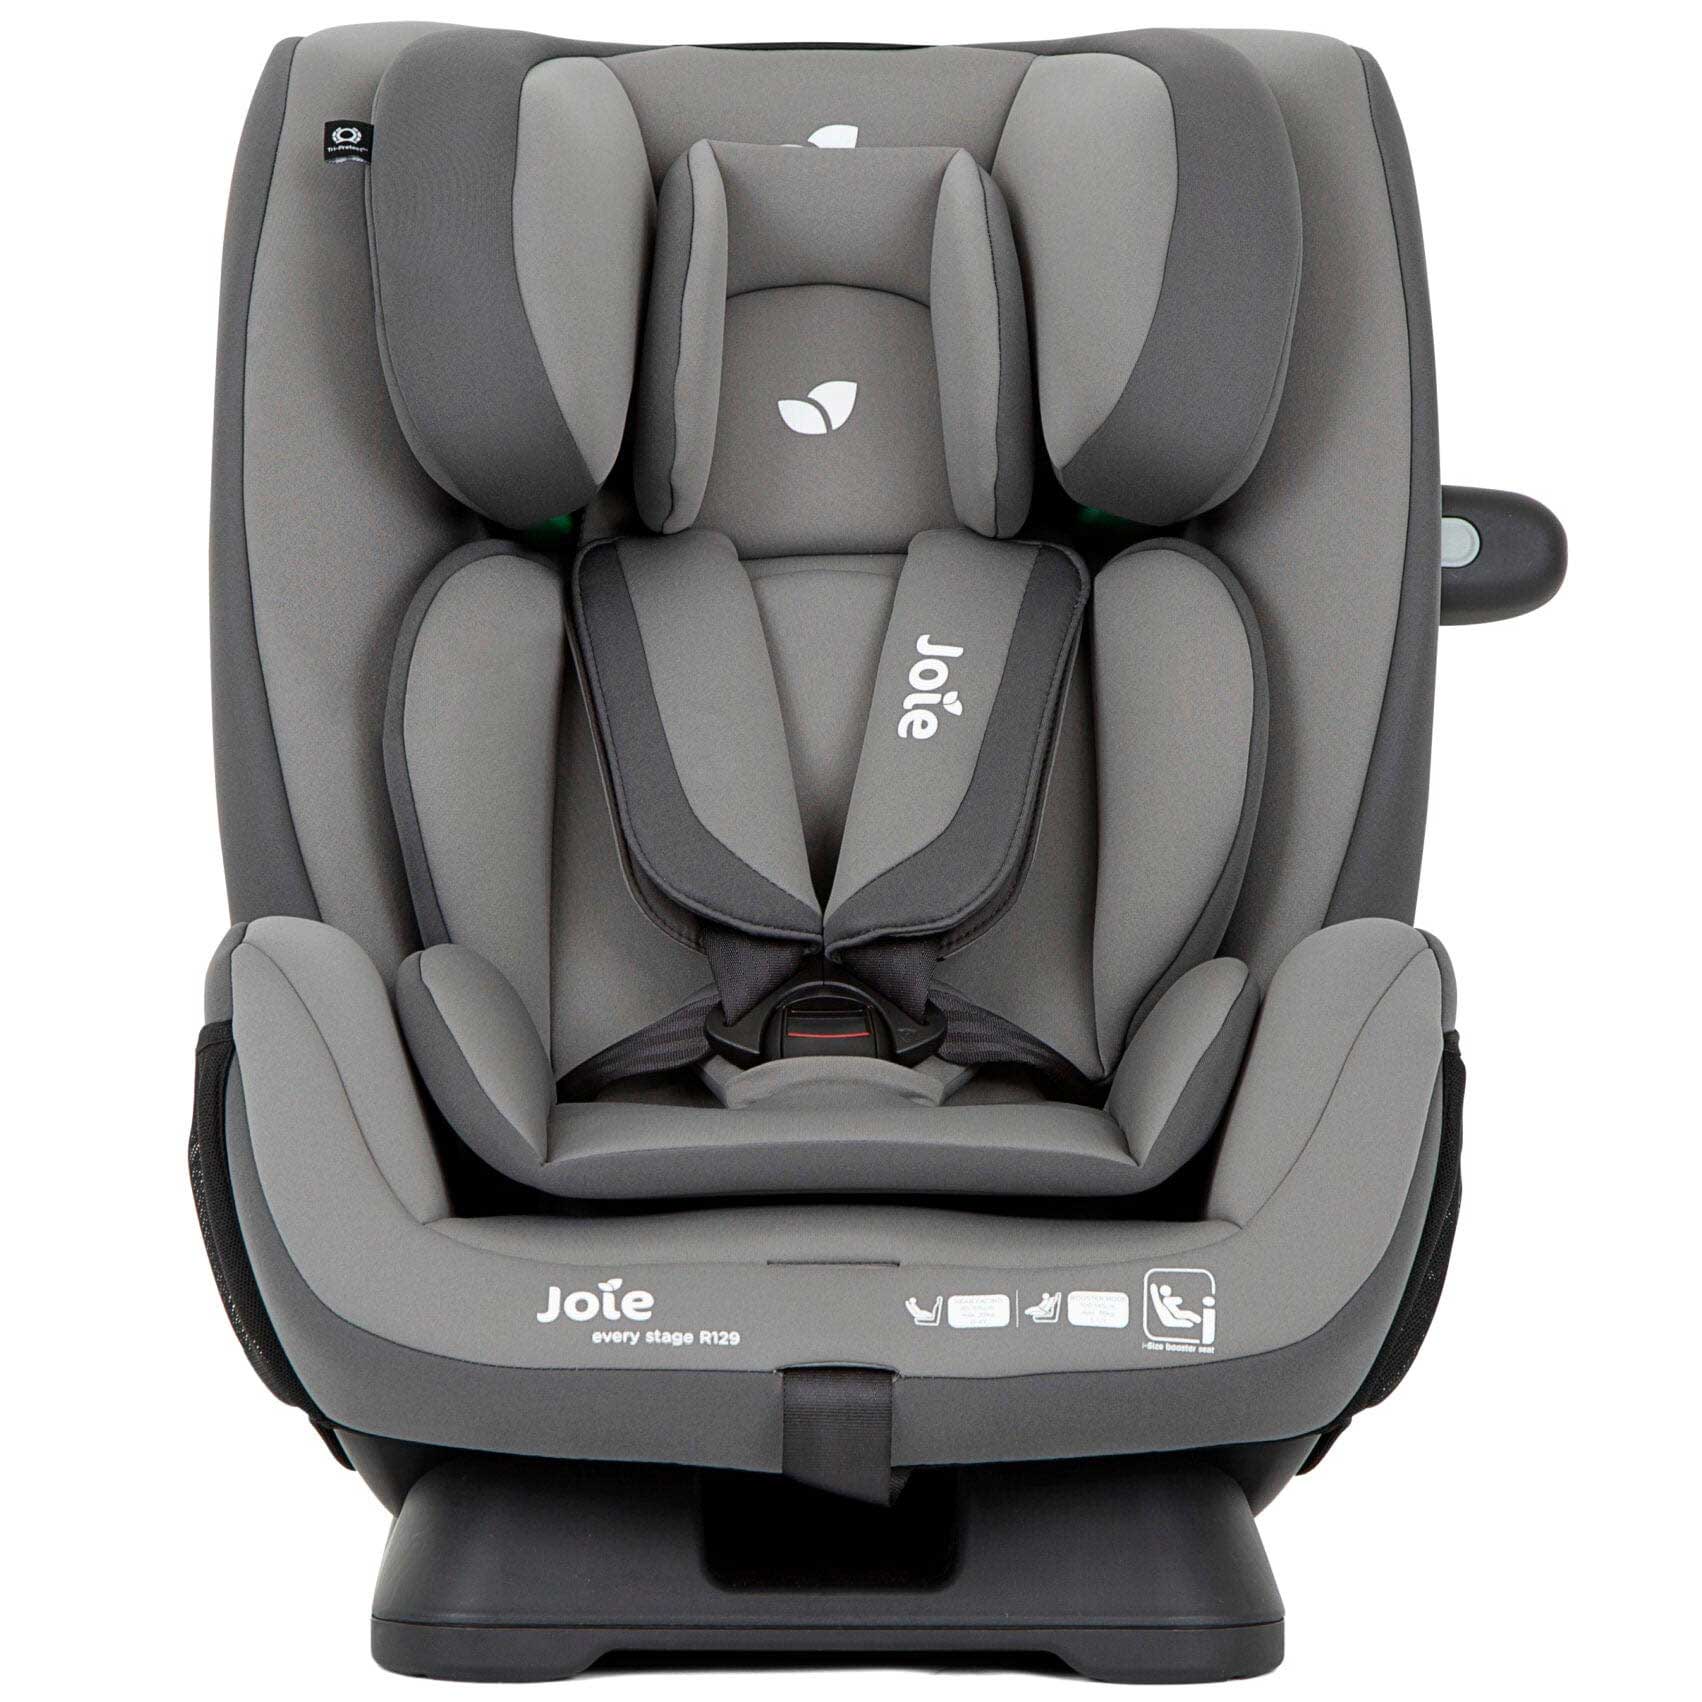 Joie combination car seats Joie Every Stage R129 - Cobblestone C2117AACBL000